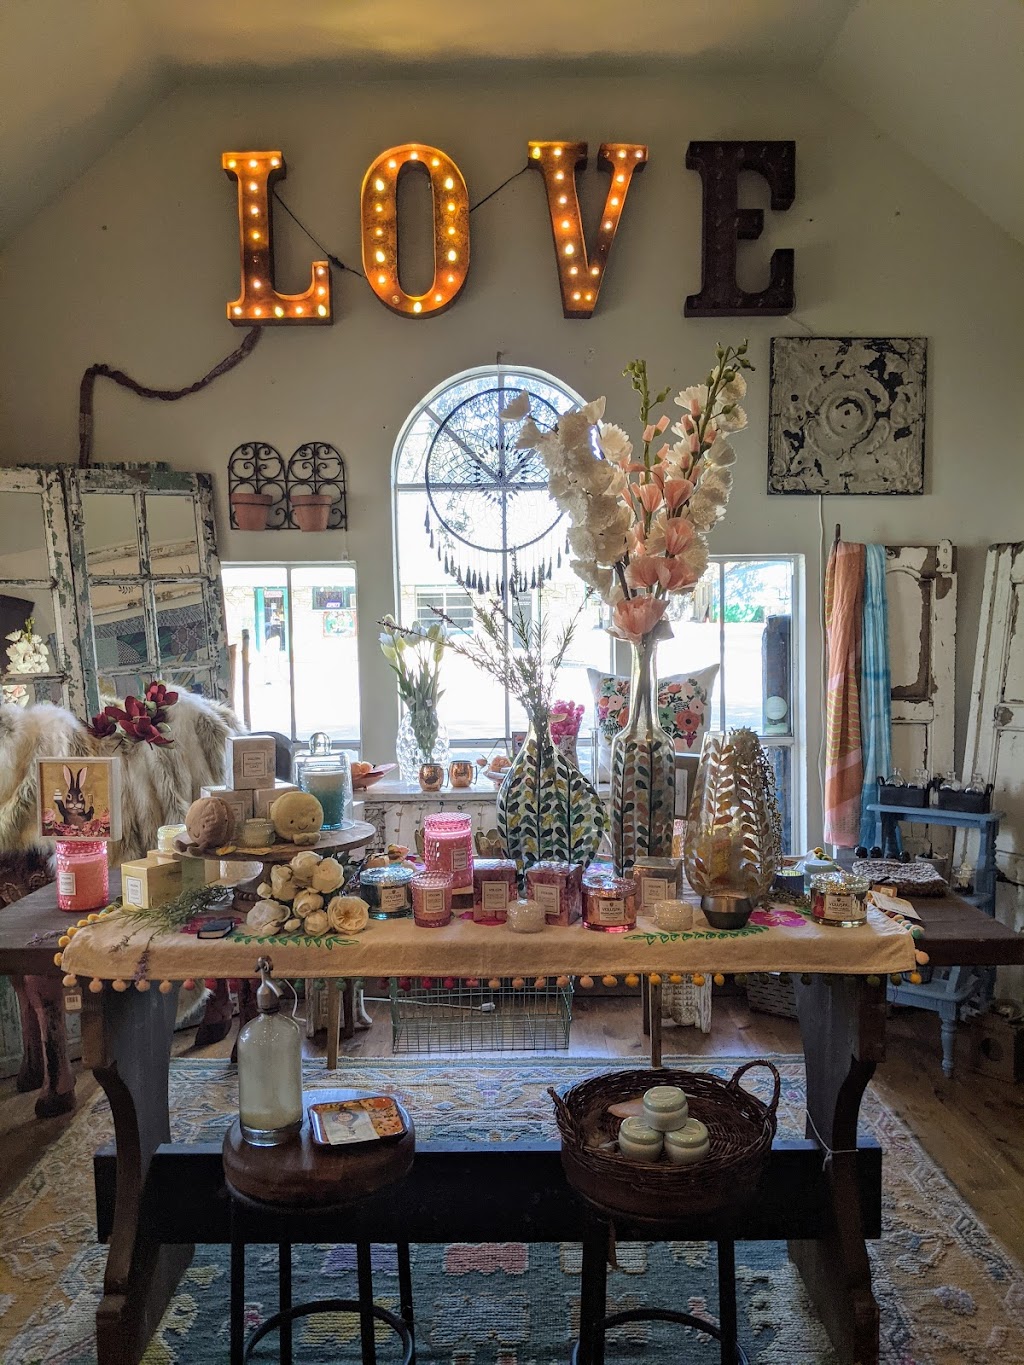 Shop the Tree House | 13615 Ranch Rd 12, Wimberley, TX 78676, USA | Phone: (512) 722-3315